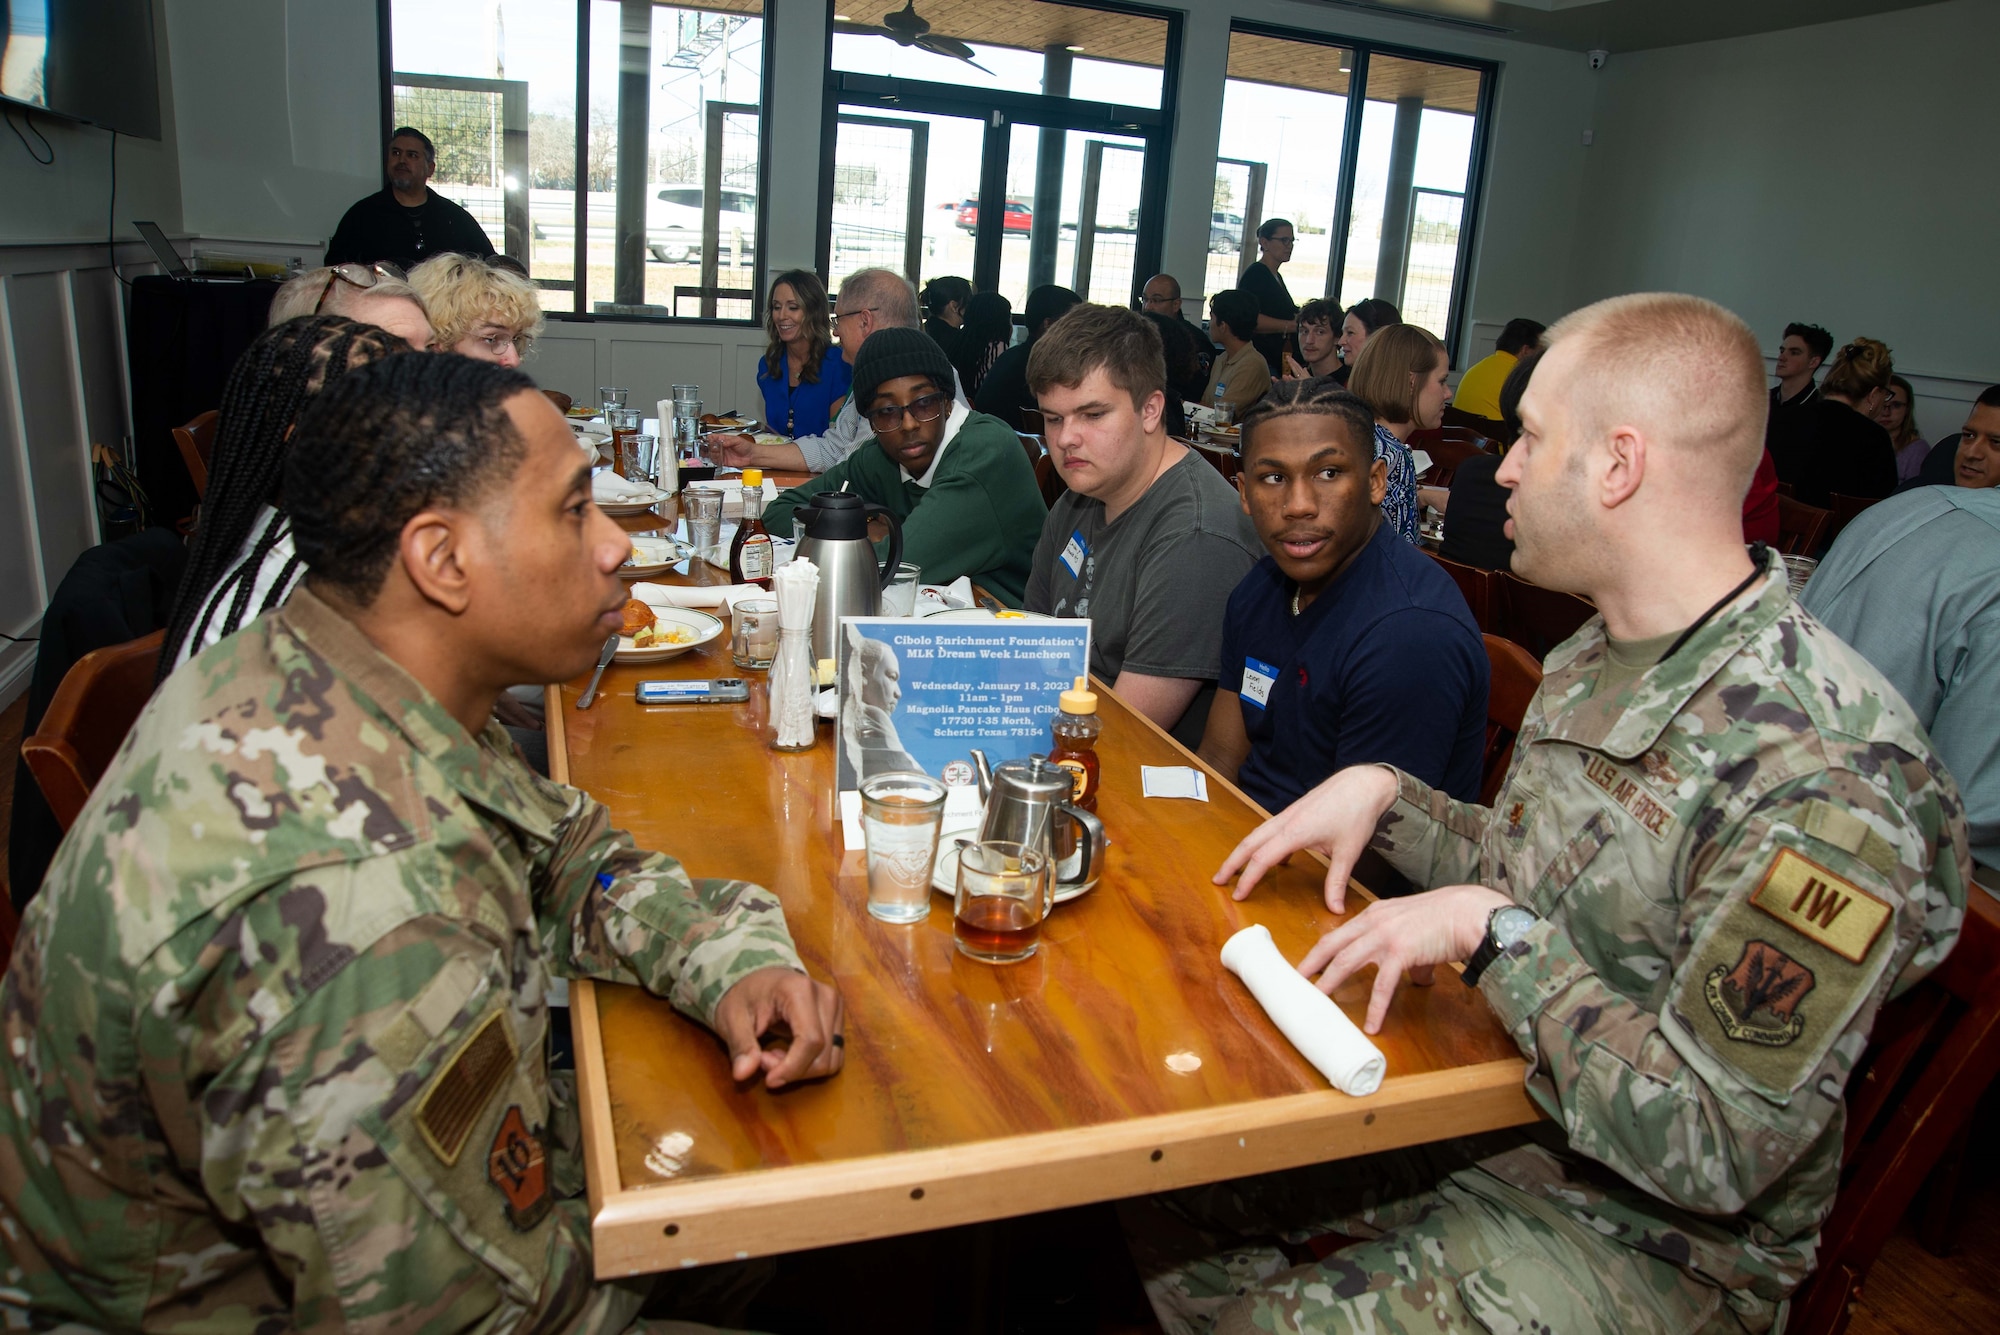 Two military people discuss careers with students.